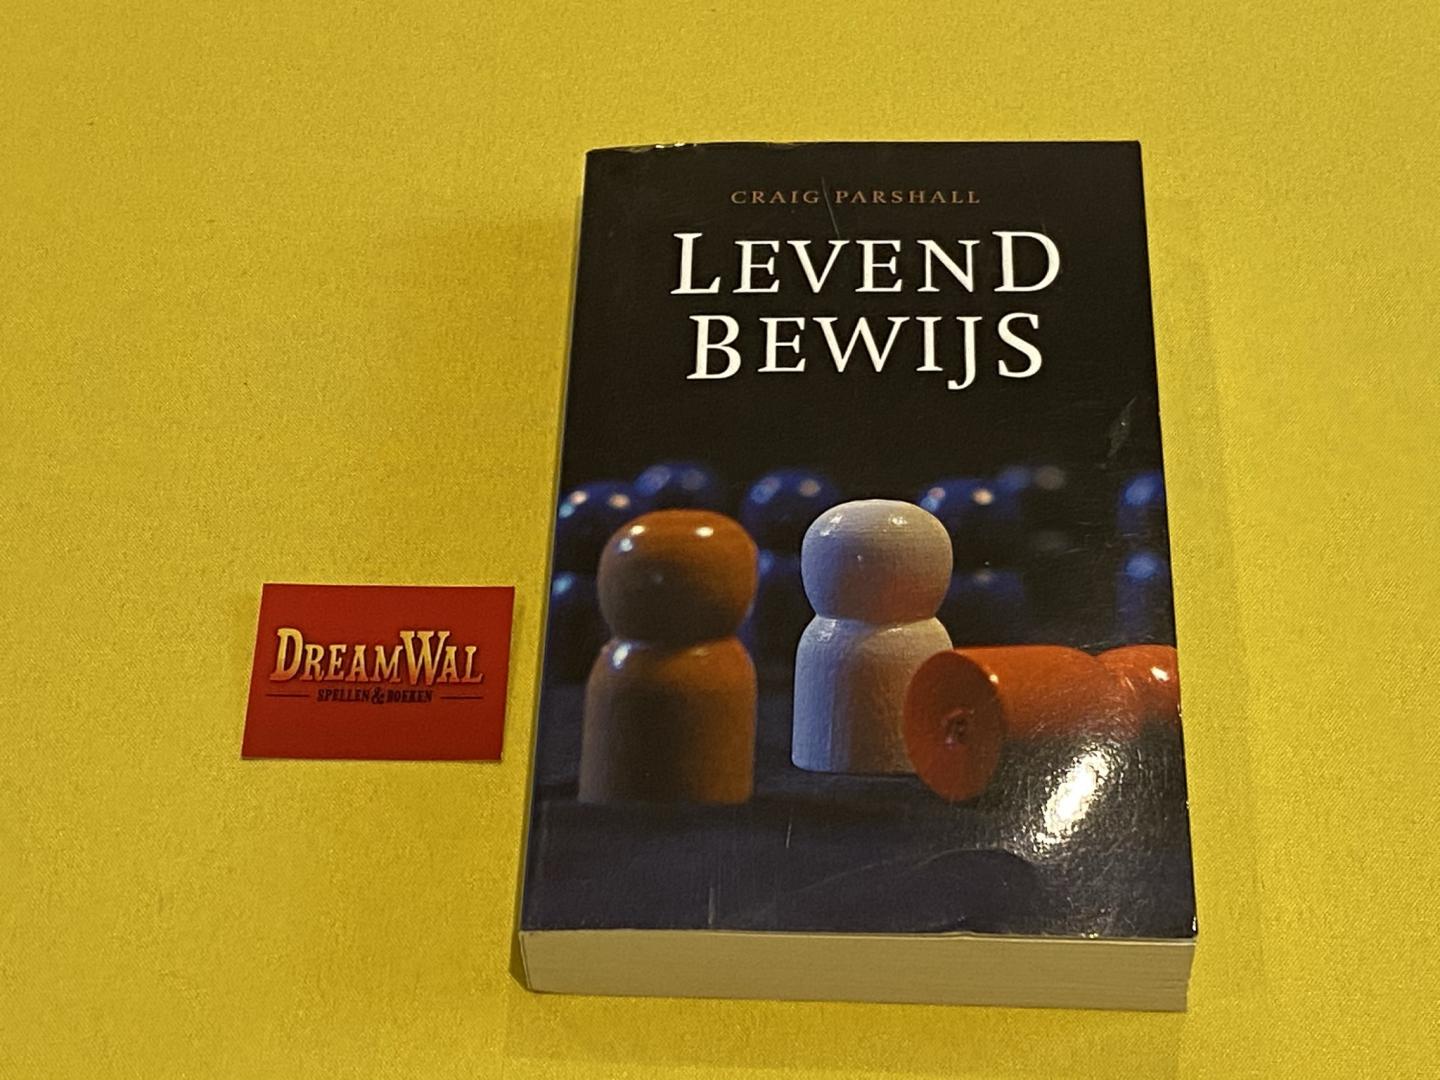 Craig Parshall - Levend bewijs